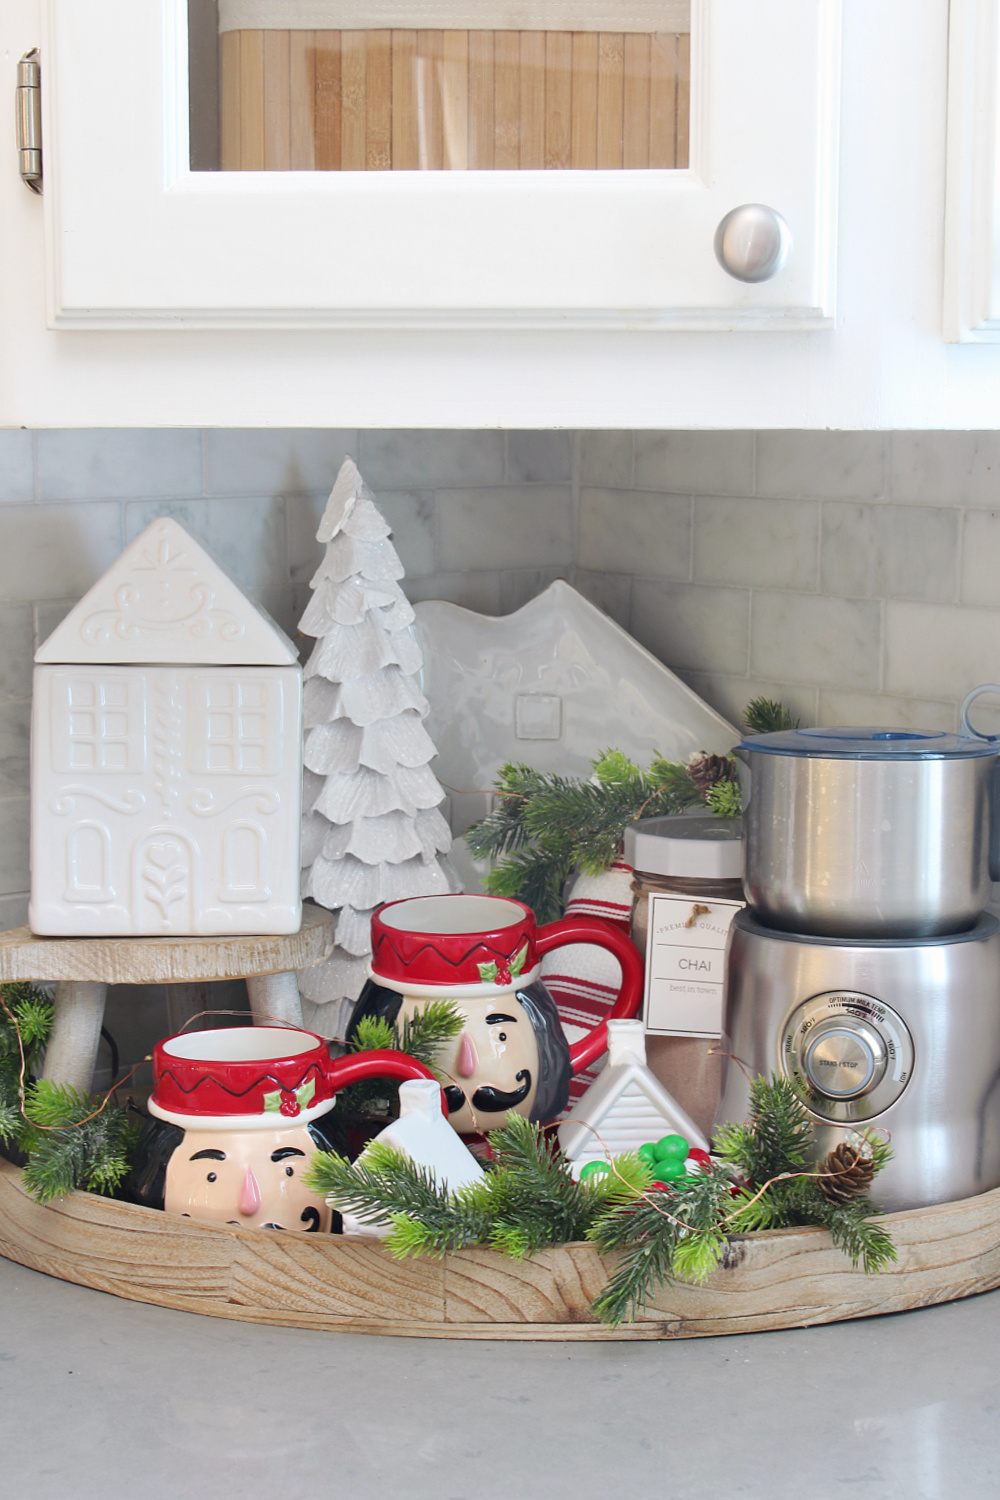 Christmas hot beverage bar tray with Nutcracker mugs, storage jar, and a milk frother.